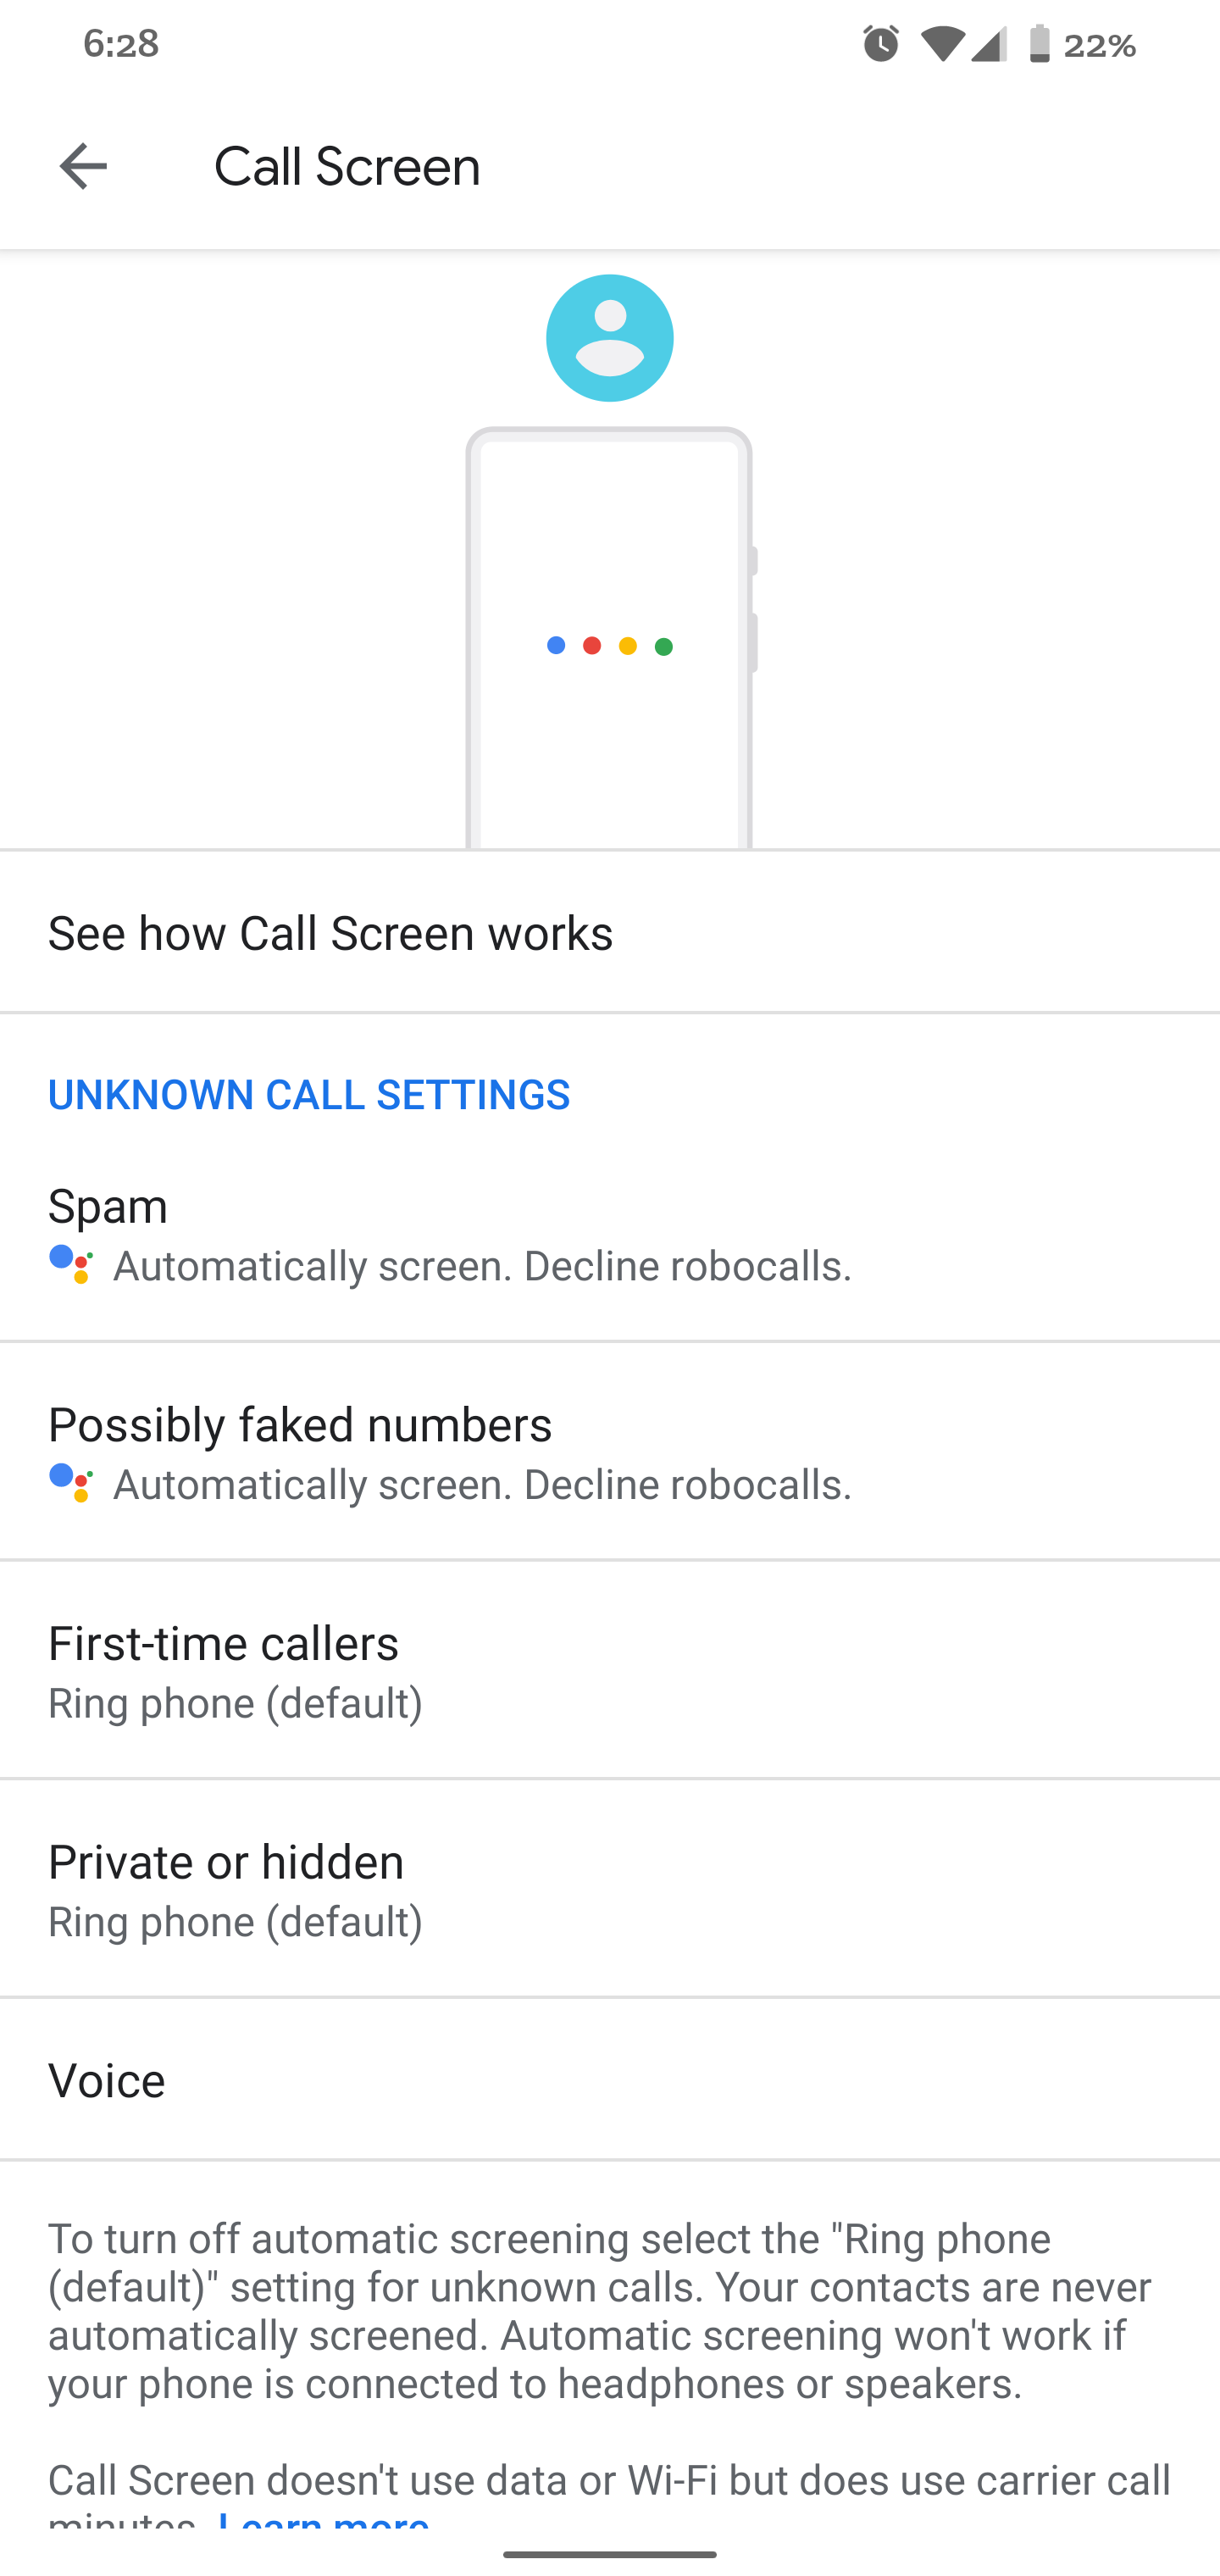 This important feature just disappeared on some Pixel 4 phones